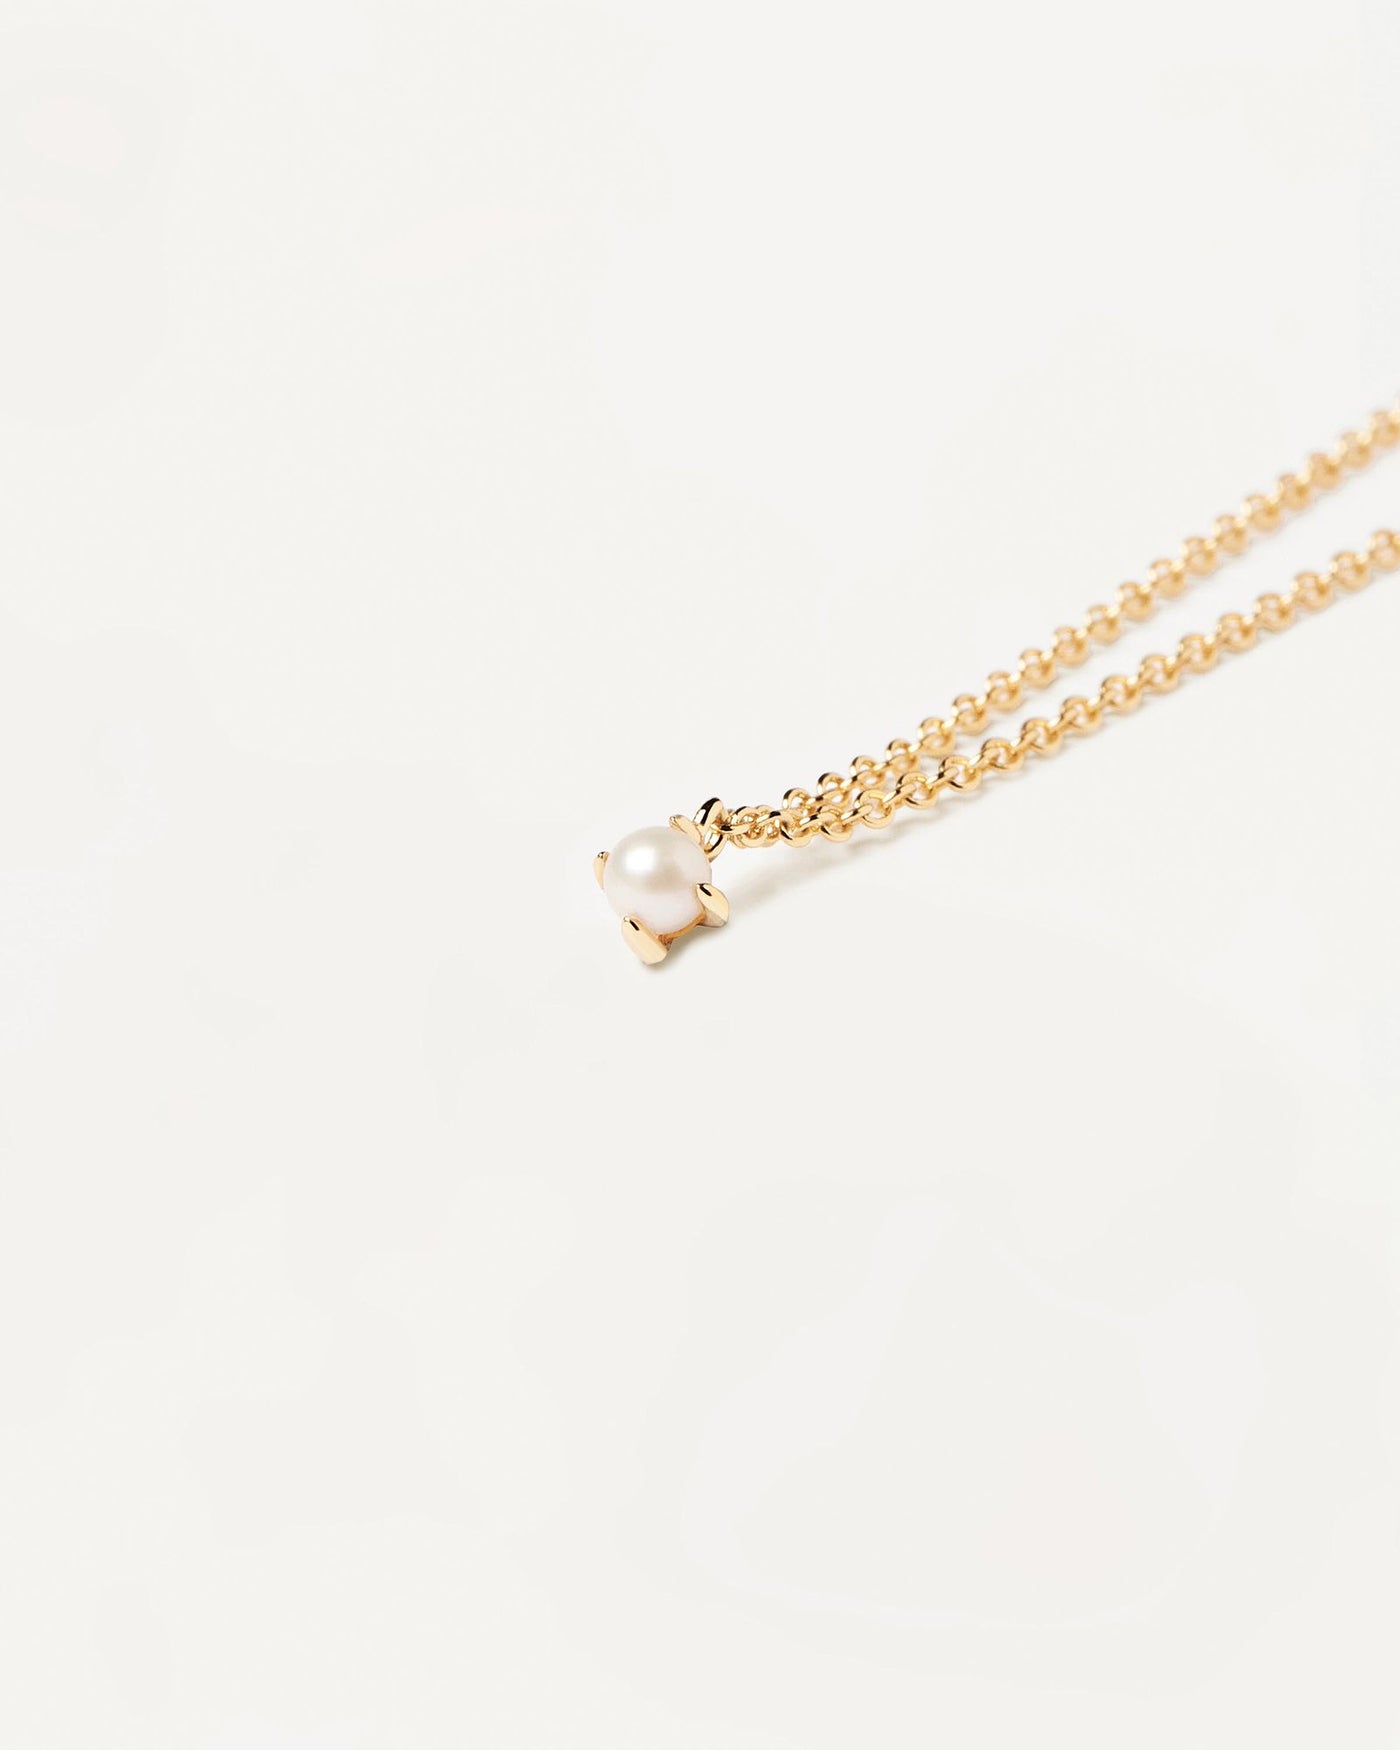 2024 Selection | Solitary Pearl Necklace. 18k gold plated chain necklace with a single natural pearl set on prongs. Get the latest arrival from PDPAOLA. Place your order safely and get this Best Seller. Free Shipping.